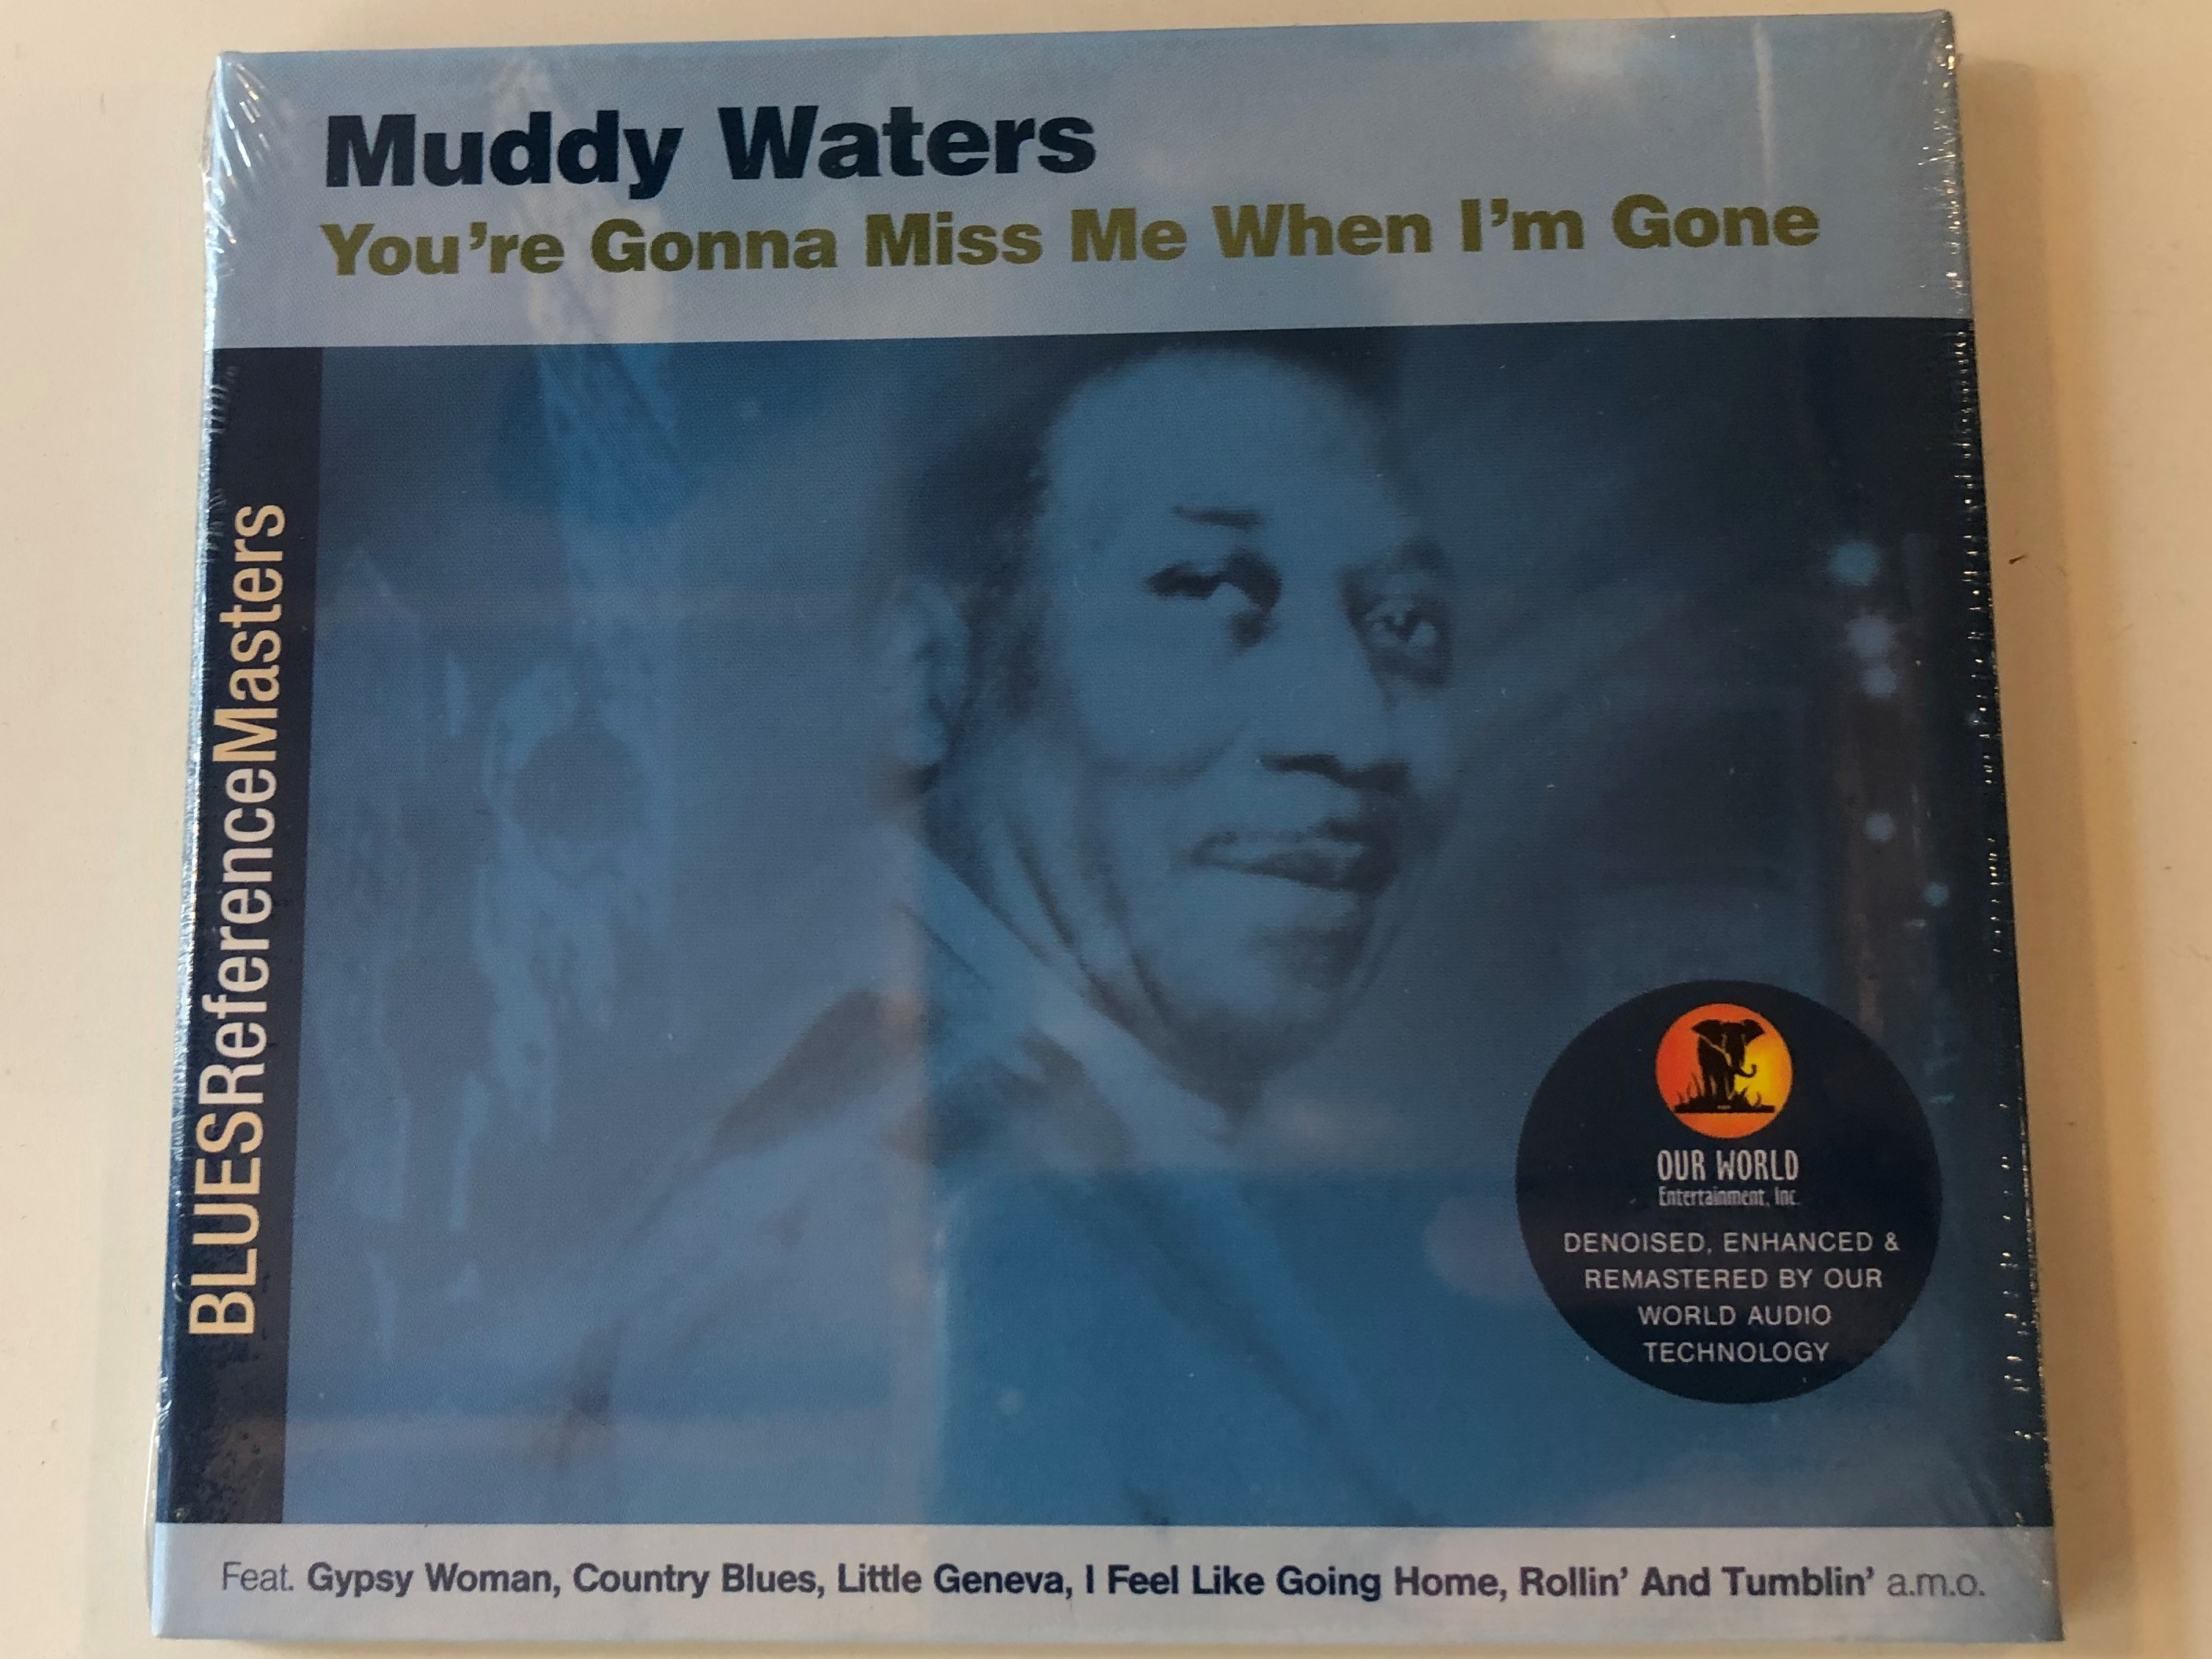 muddy-waters-you-re-gonna-miss-me-when-i-m-gone-blues-reference-masters-feat.-gypsy-woman-country-blues-little-geneva-i-feel-like-going-home-rollin-and-tumblin-a.m.o.-our-world-entert-1-.jpg